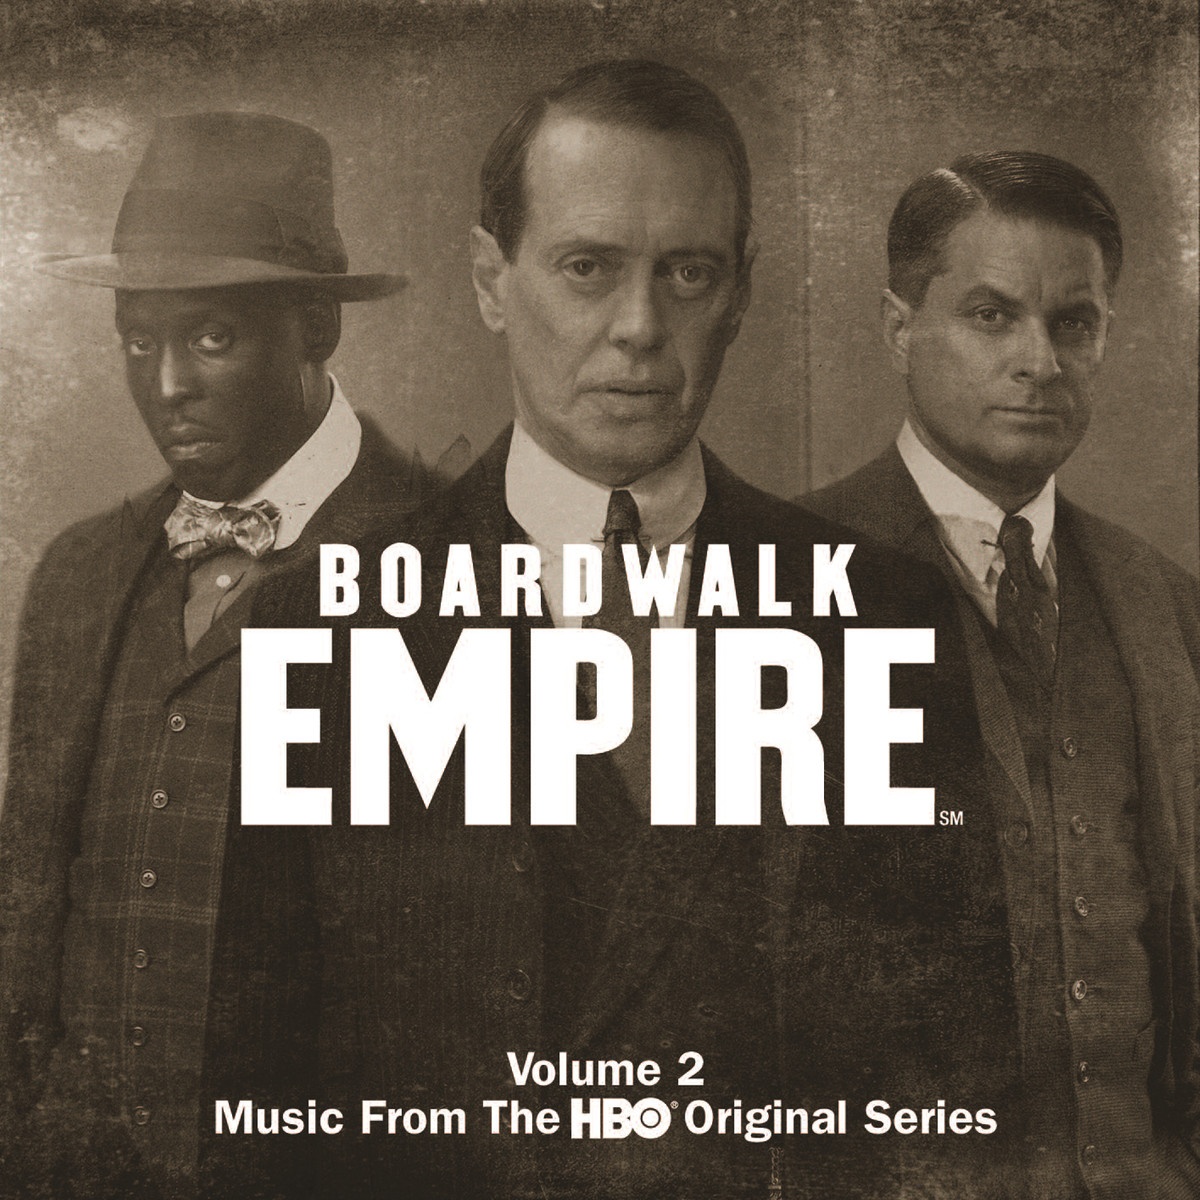 Boardwalk Empire, Vol. 2 (Music From the HBO Original Series)